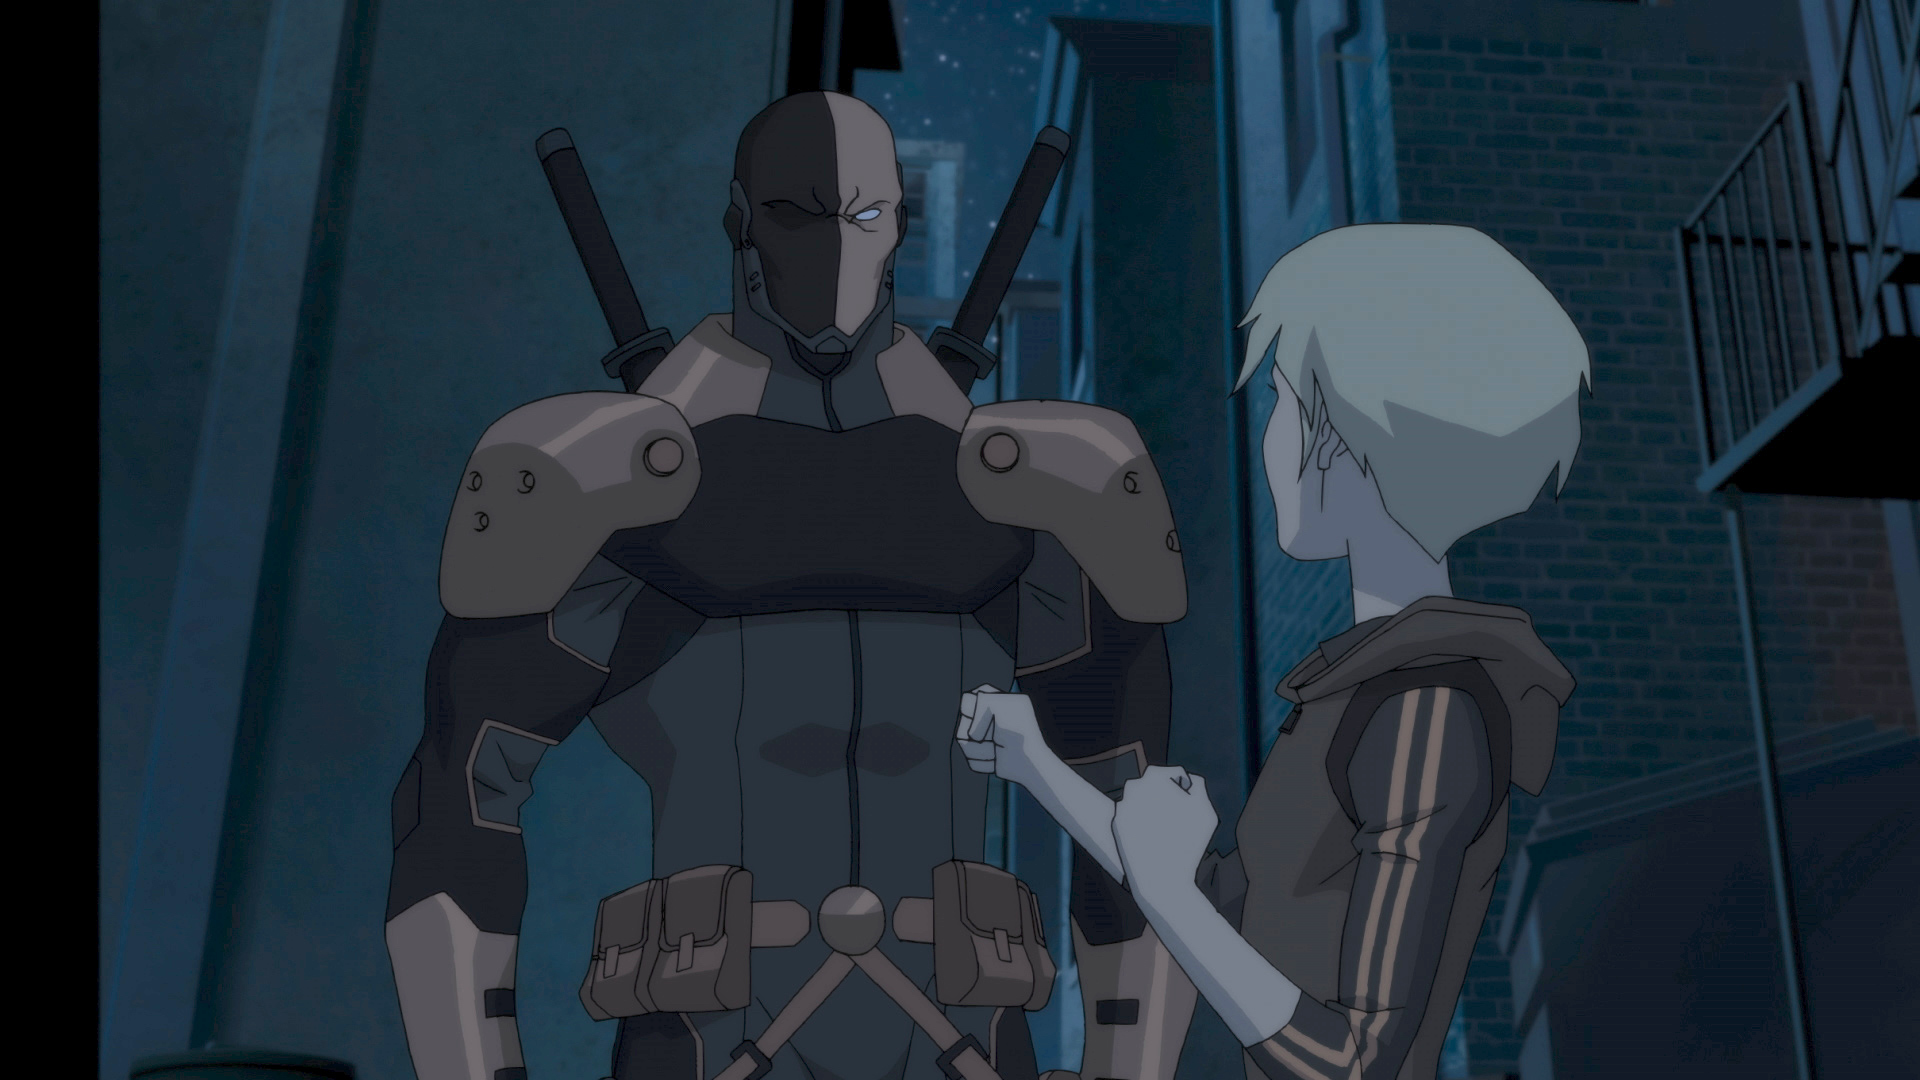 Young Justice: Outsiders — Episode 22 Review: "Antisocial Pathologies"